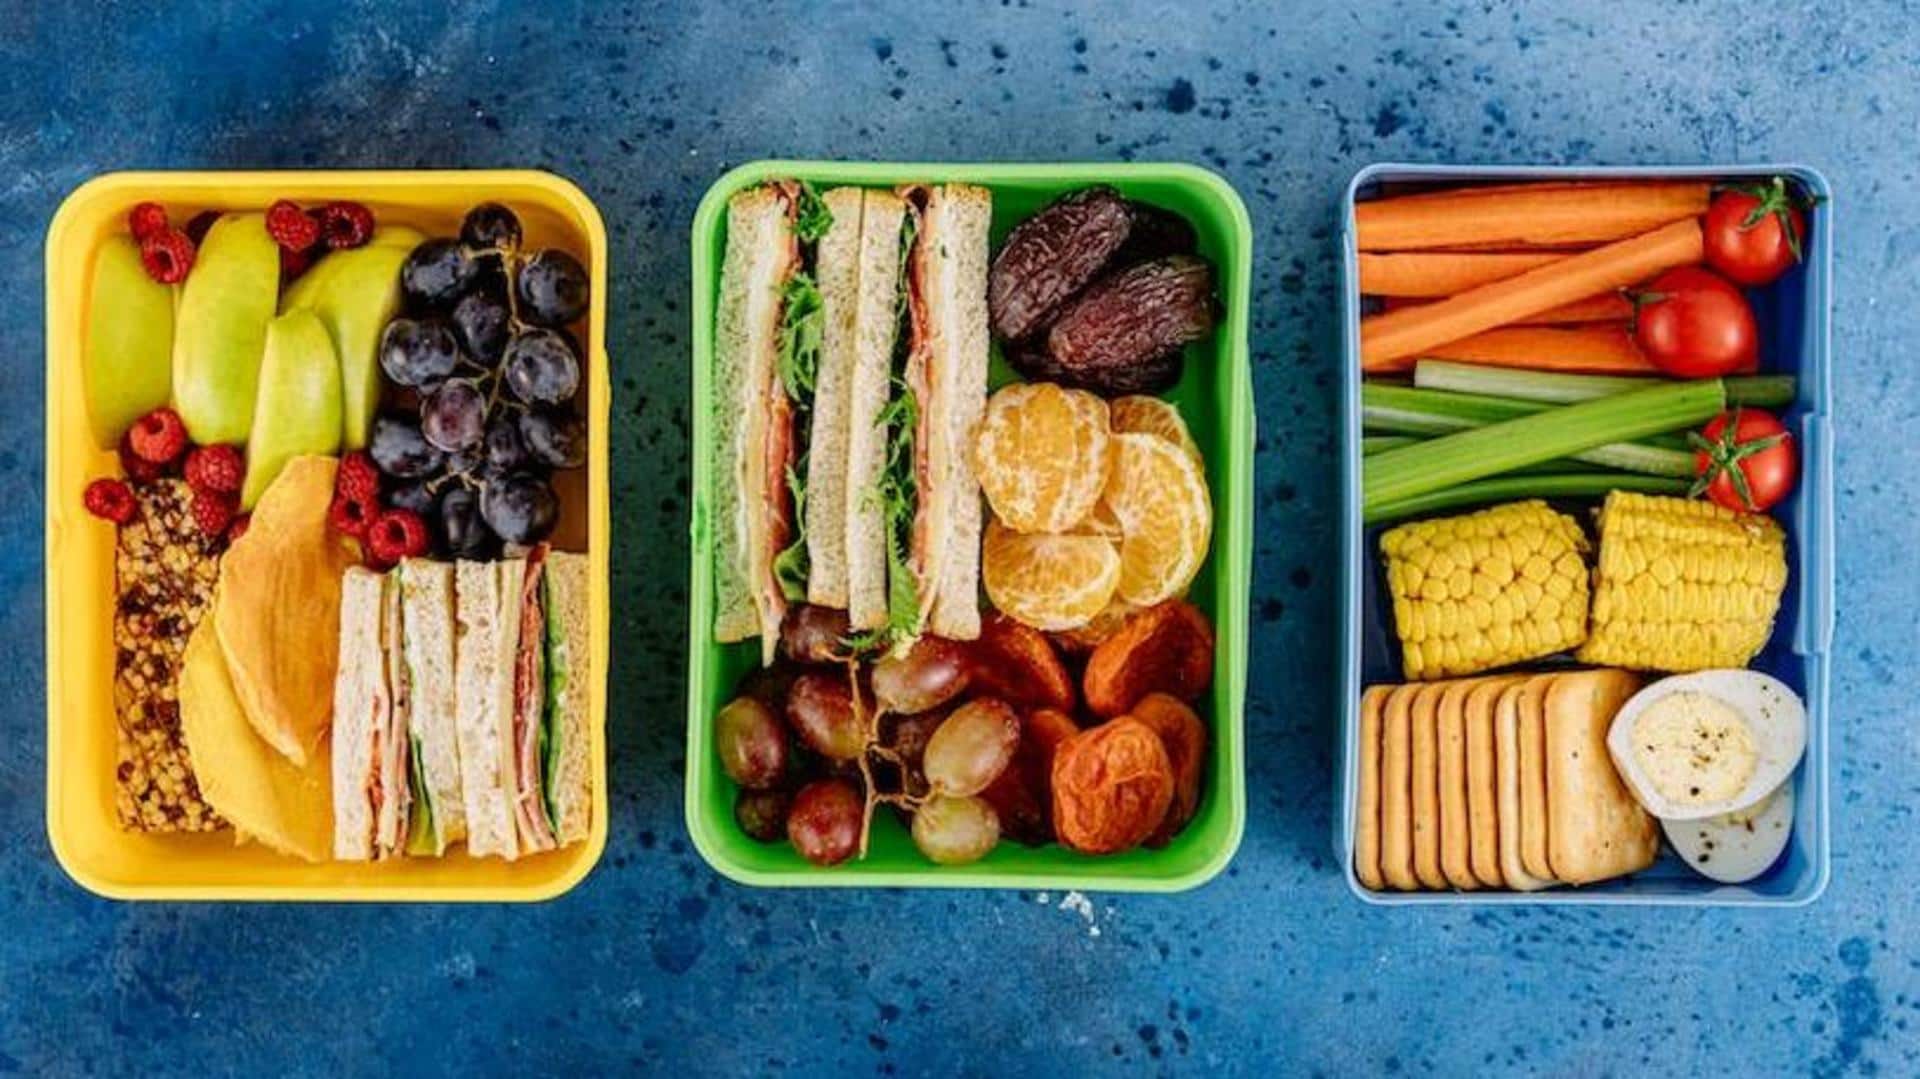 Foods to avoid putting in your children's lunch box